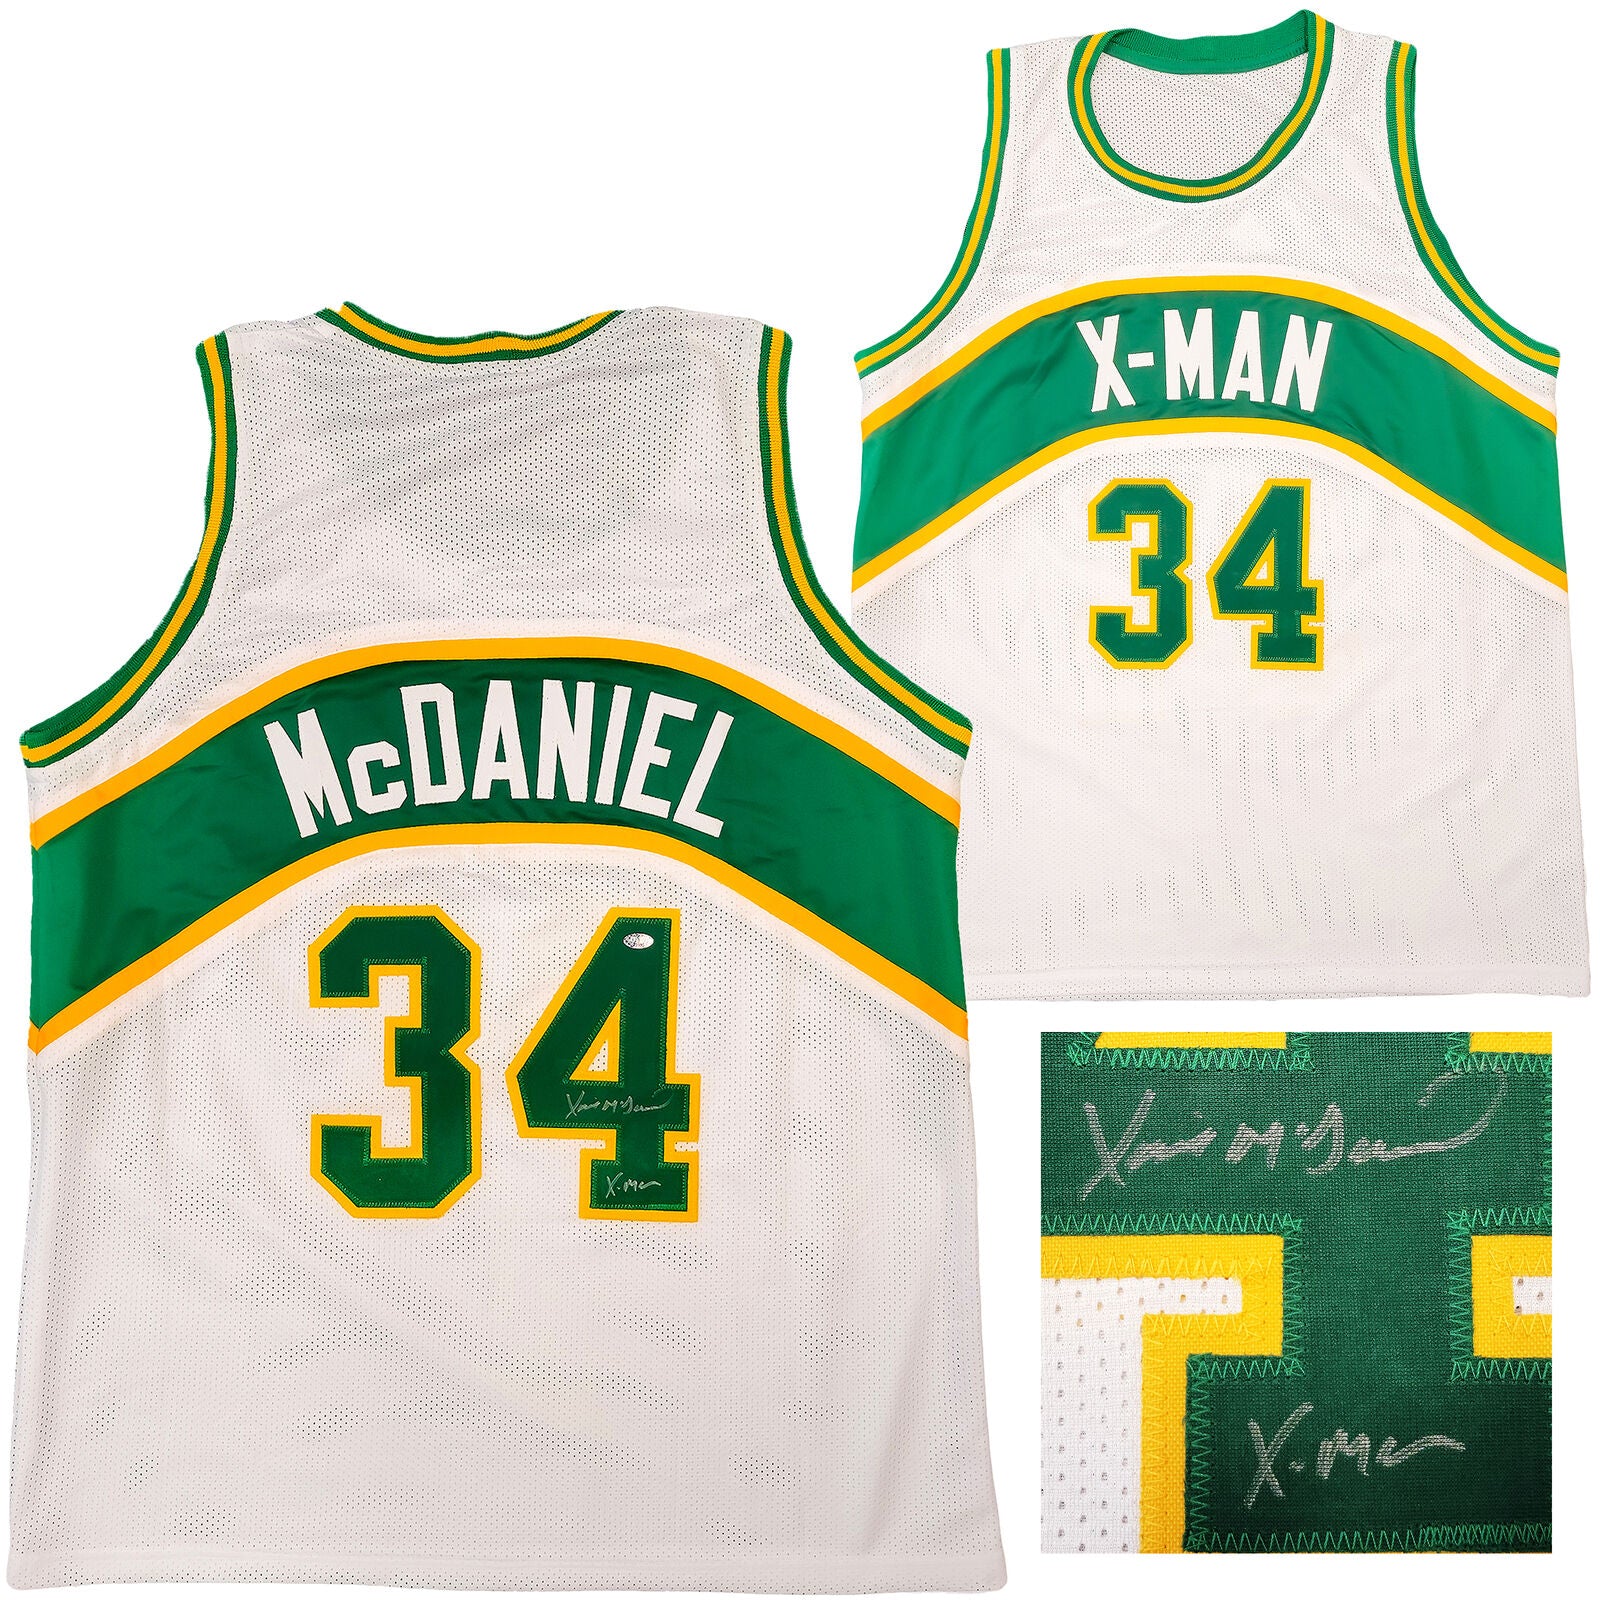 Seattle Super Sonics Jack Sikma Signed Green Throwback Jersey